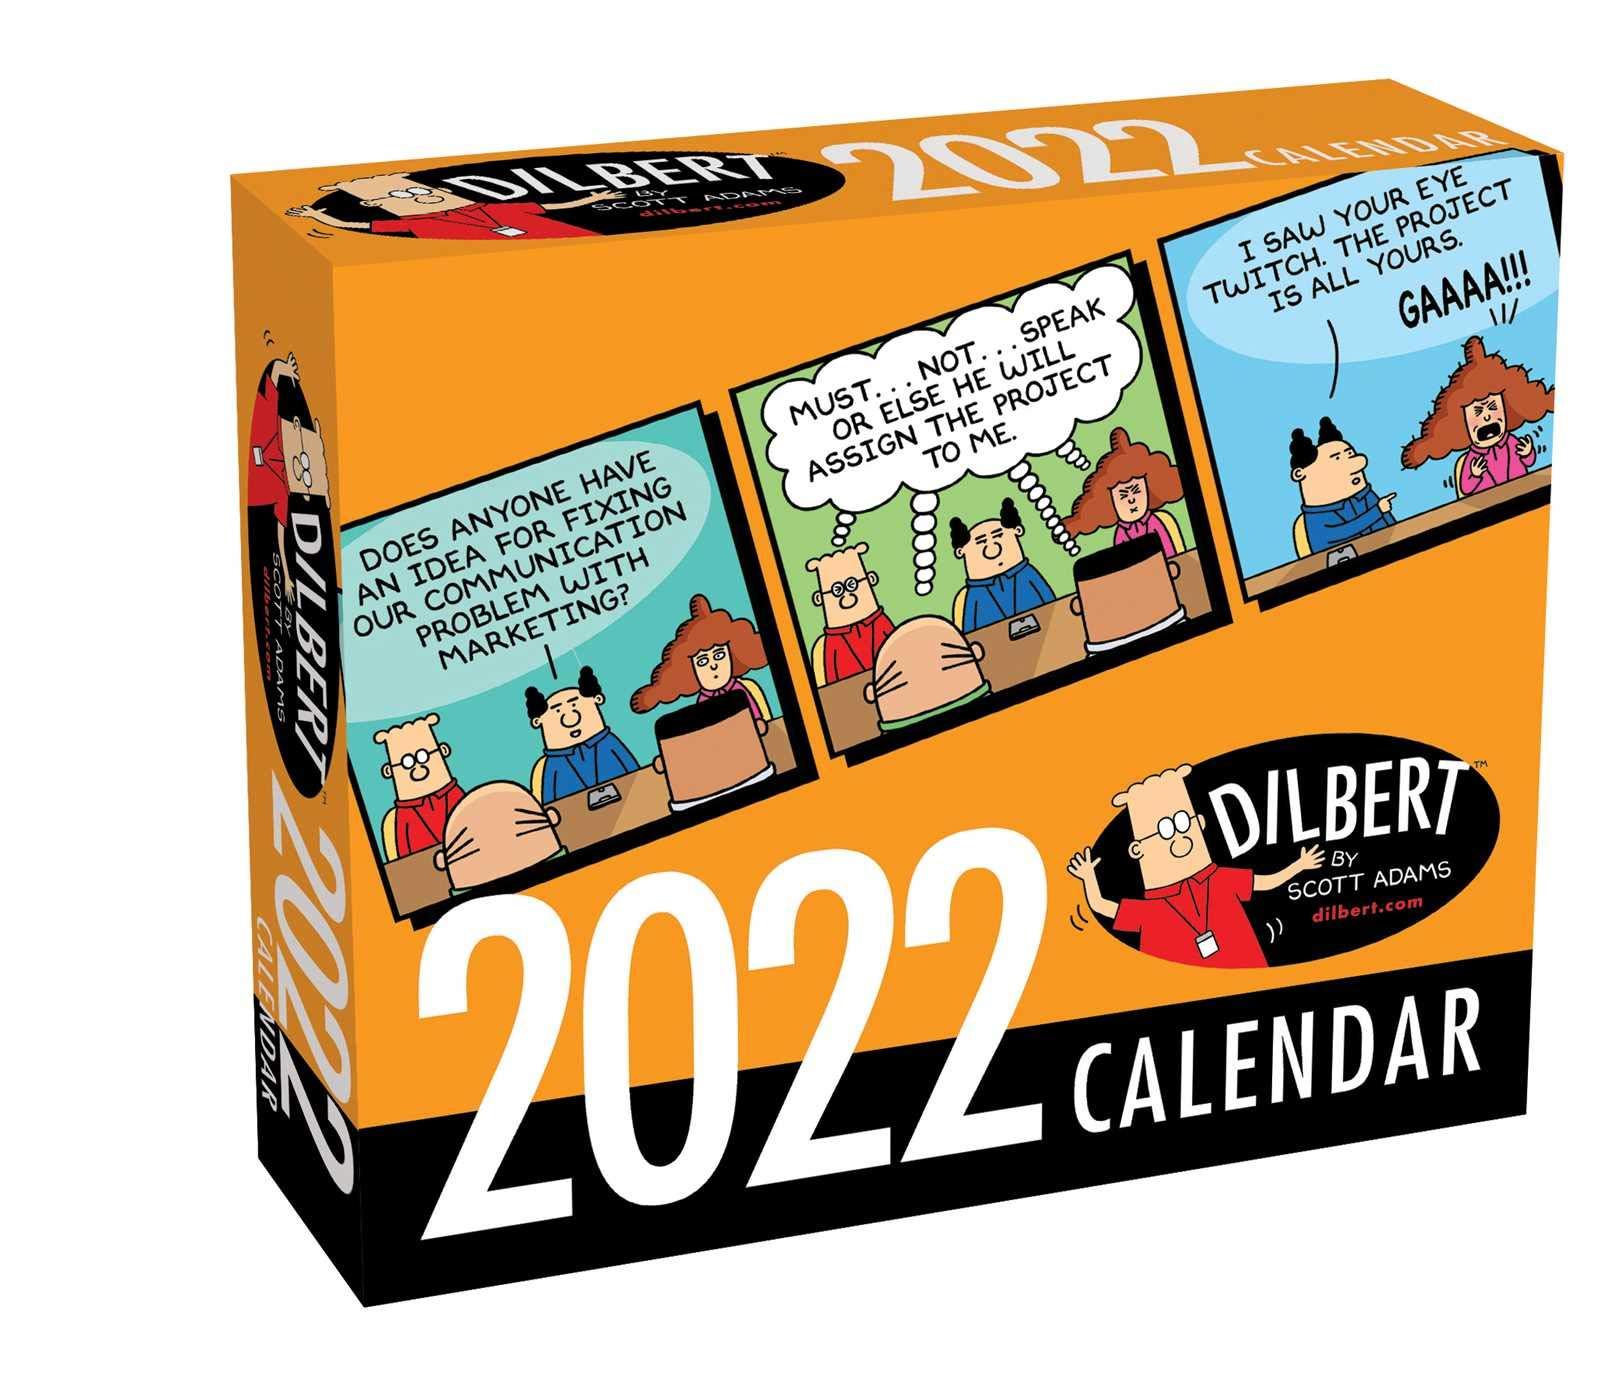 Dilbert 2022 Day-to-Day Calendar for $7.99